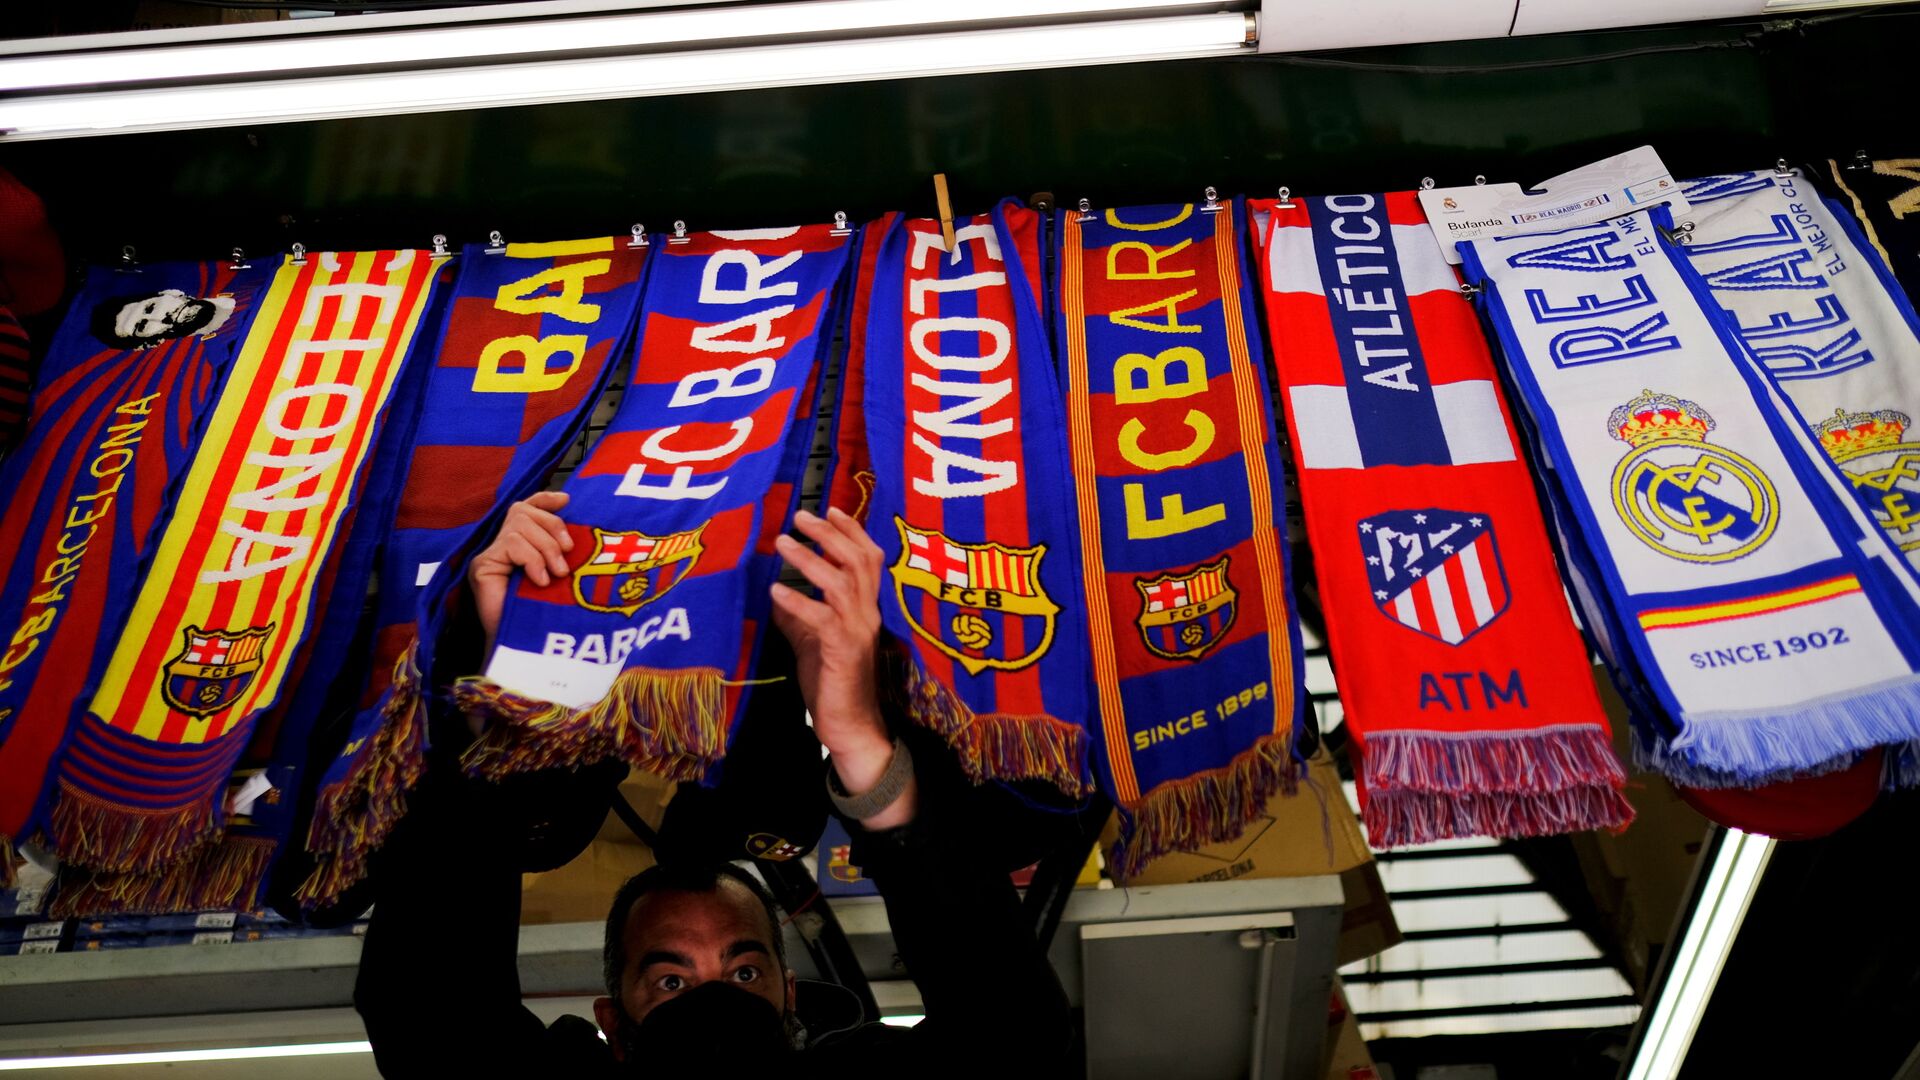 Soccer Football - FC Barcelona, Atletico Madrid and Real Madrid scarves are displayed inside a store at Las Ramblas as twelve of Europe's top football clubs launch a breakaway Super League - Barcelona, Spain - April 19, 2021 - اسپوتنیک افغانستان  , 1920, 06.02.2022